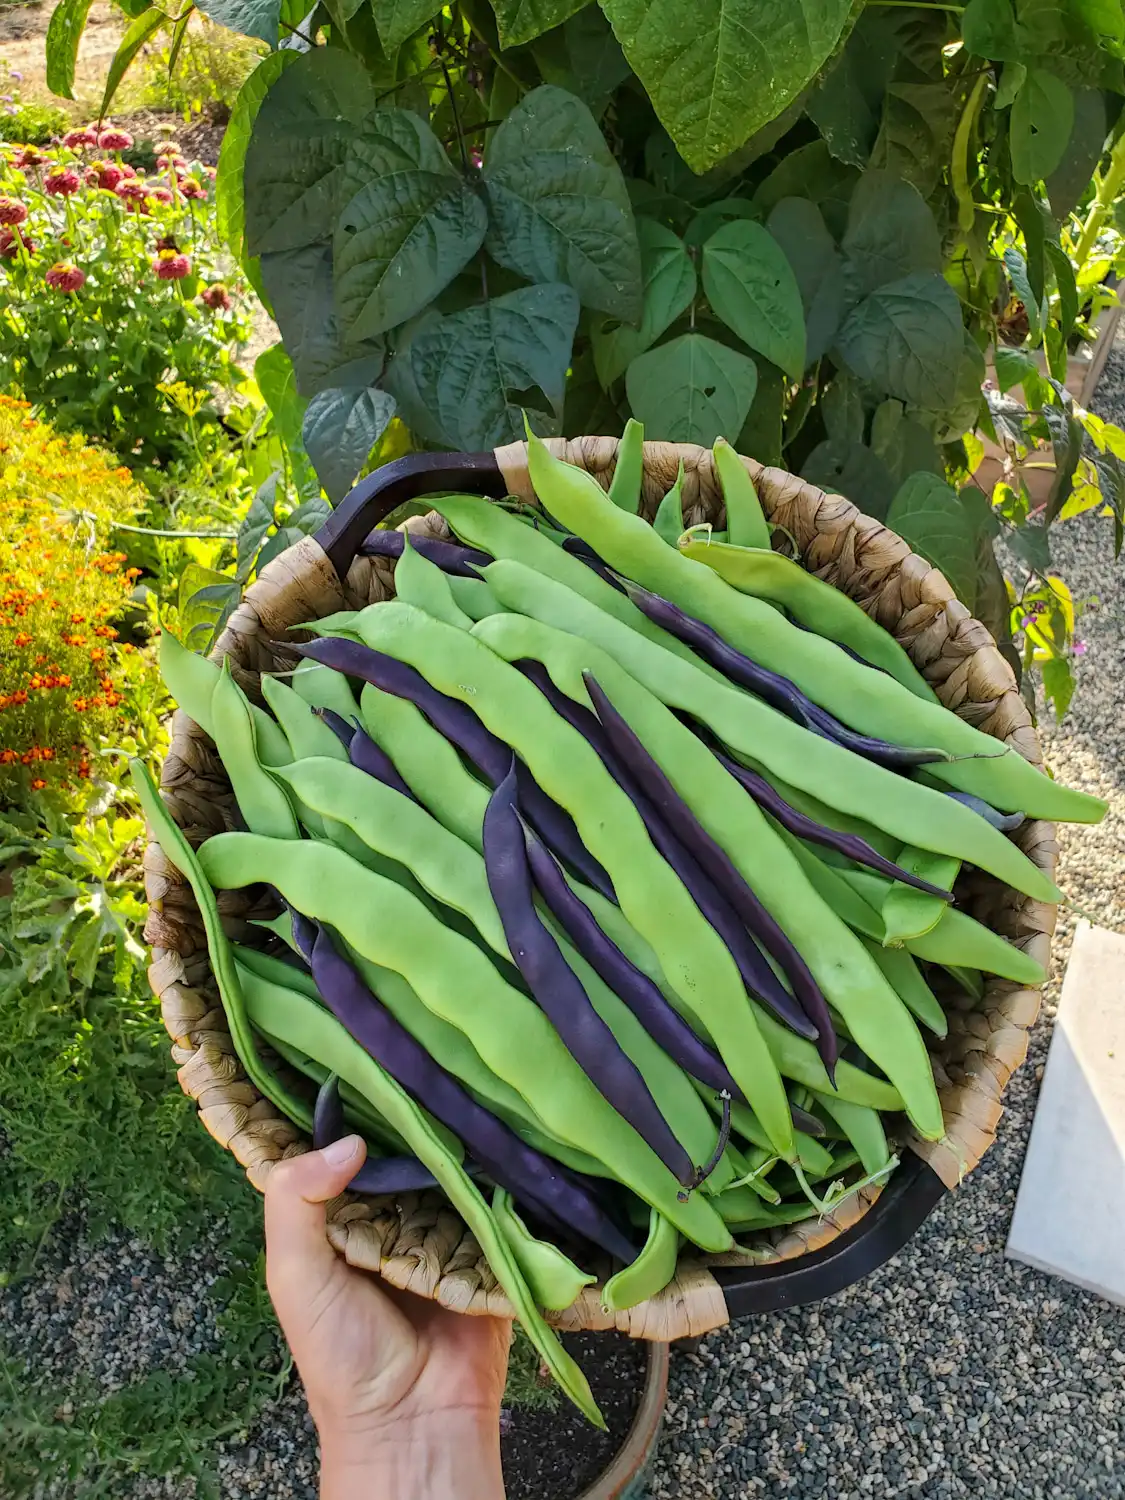 A wicker basket is held by and outstretched hand, the long and slender purple and green veggies are neatly arranged in the basket. 